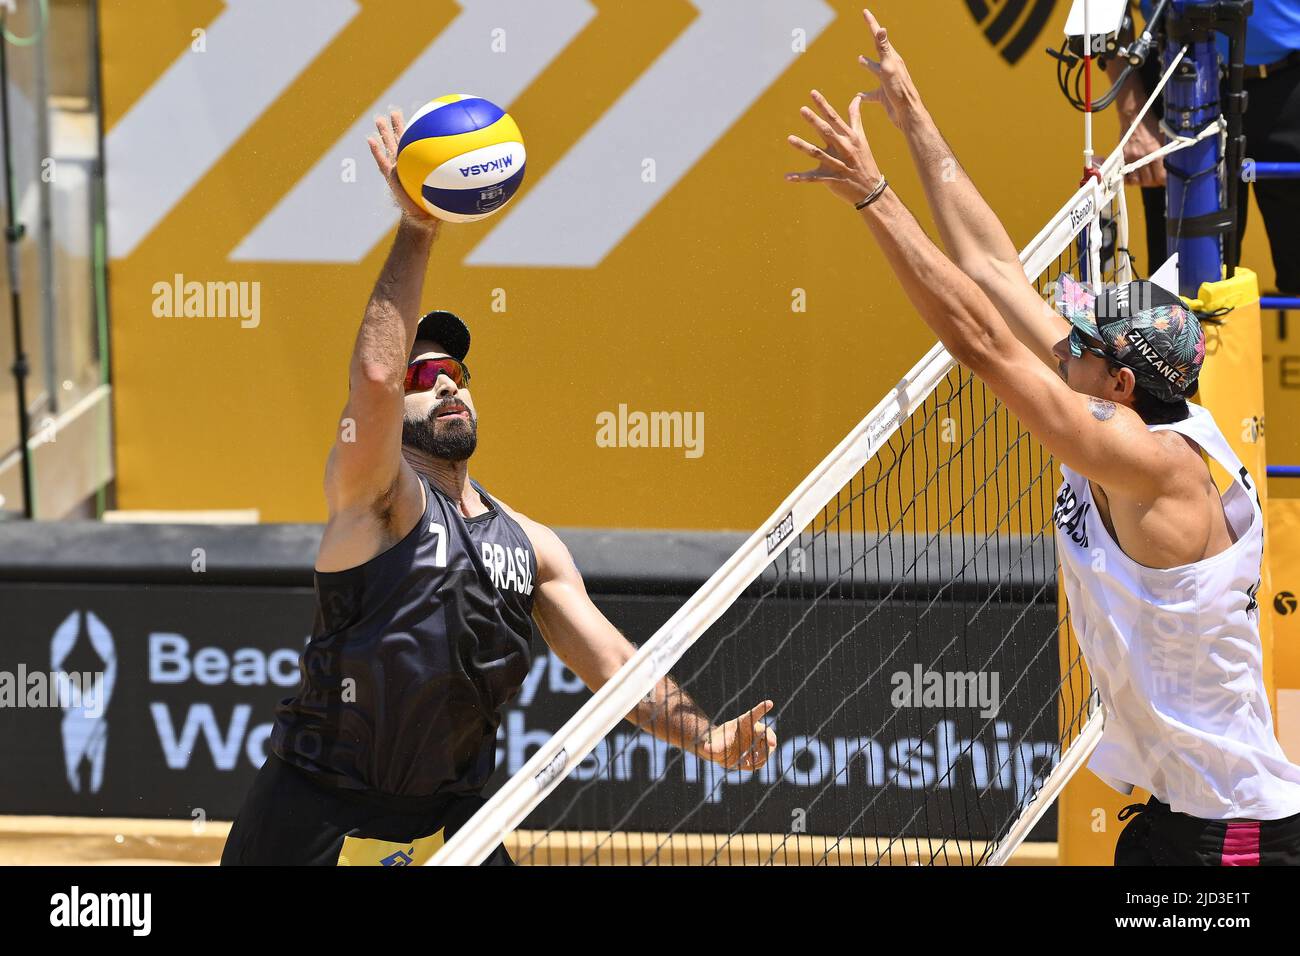 Rome, Italy. 17th June, 2022. Andre Loyola Stein/George Souto Maior Wanderley (BRA) vs Bruno Schmidt/Saymon Barbosa Santos (BRA) during the Beach Volleyball World Championships quarterfinals on 17th June 2022 at the Foro Italico in Rome, Italy. Credit: Live Media Publishing Group/Alamy Live News Stock Photo